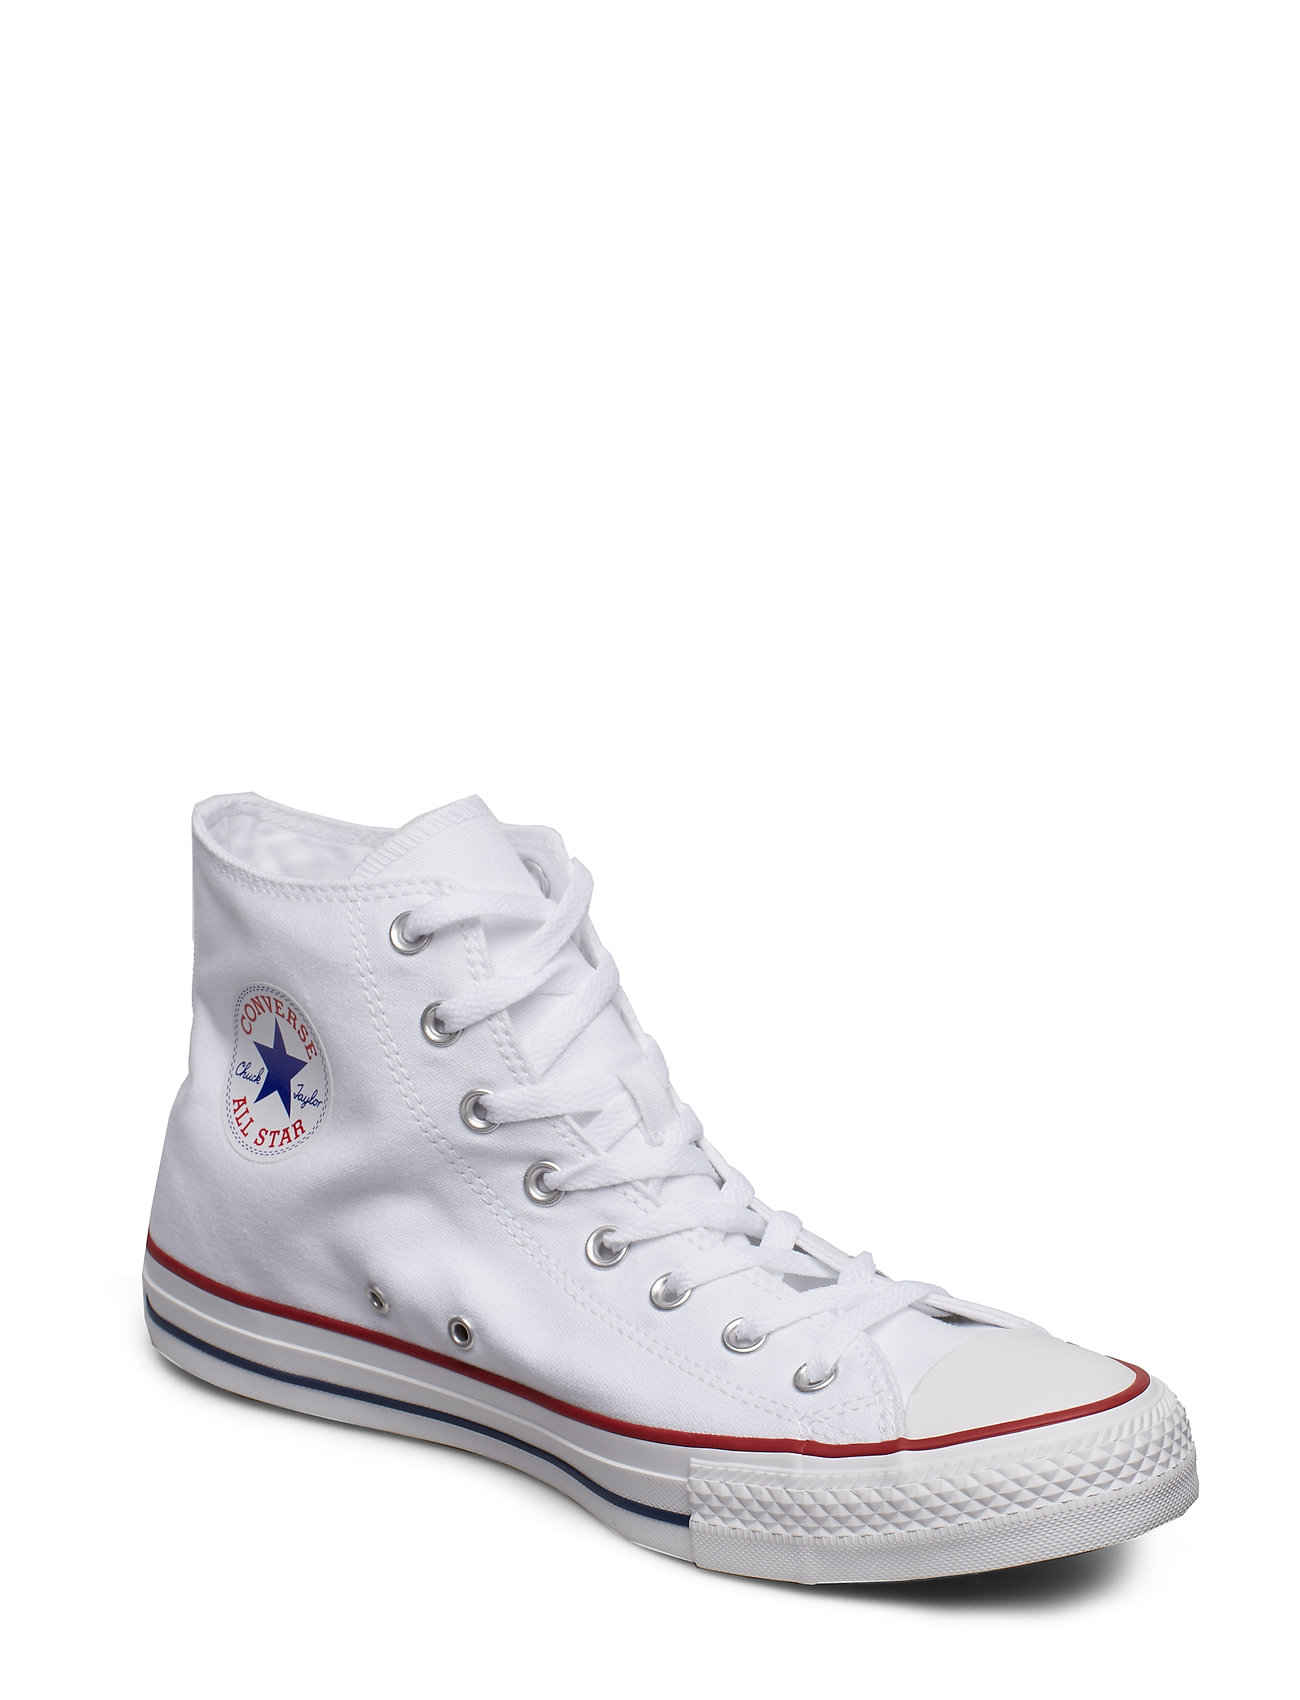 Chuck Taylor All Star High-top Sneakers White Converse